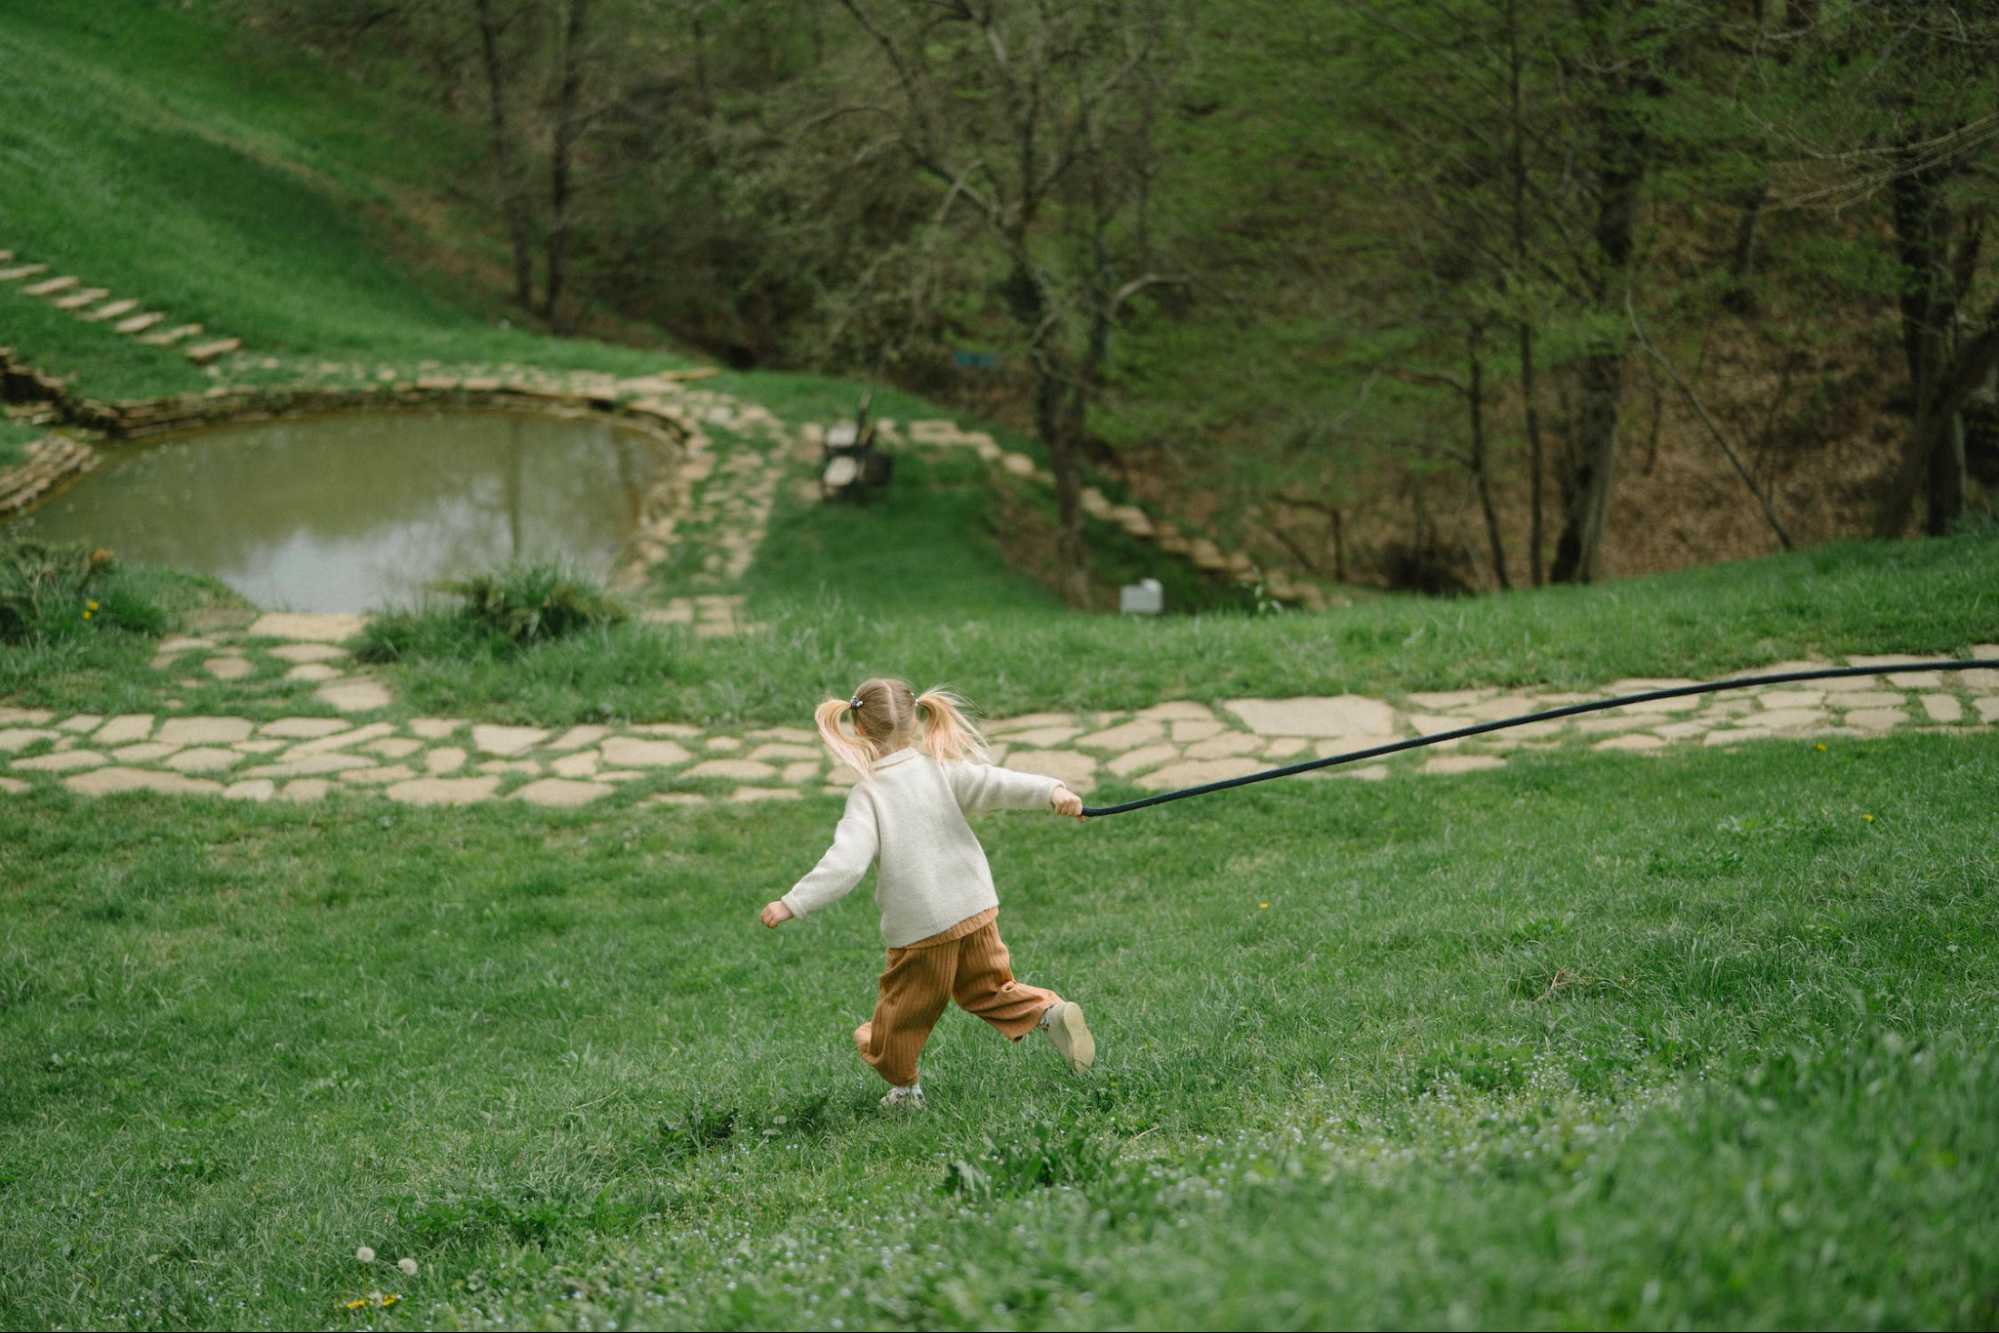 This is an image of a small child running in the grass.